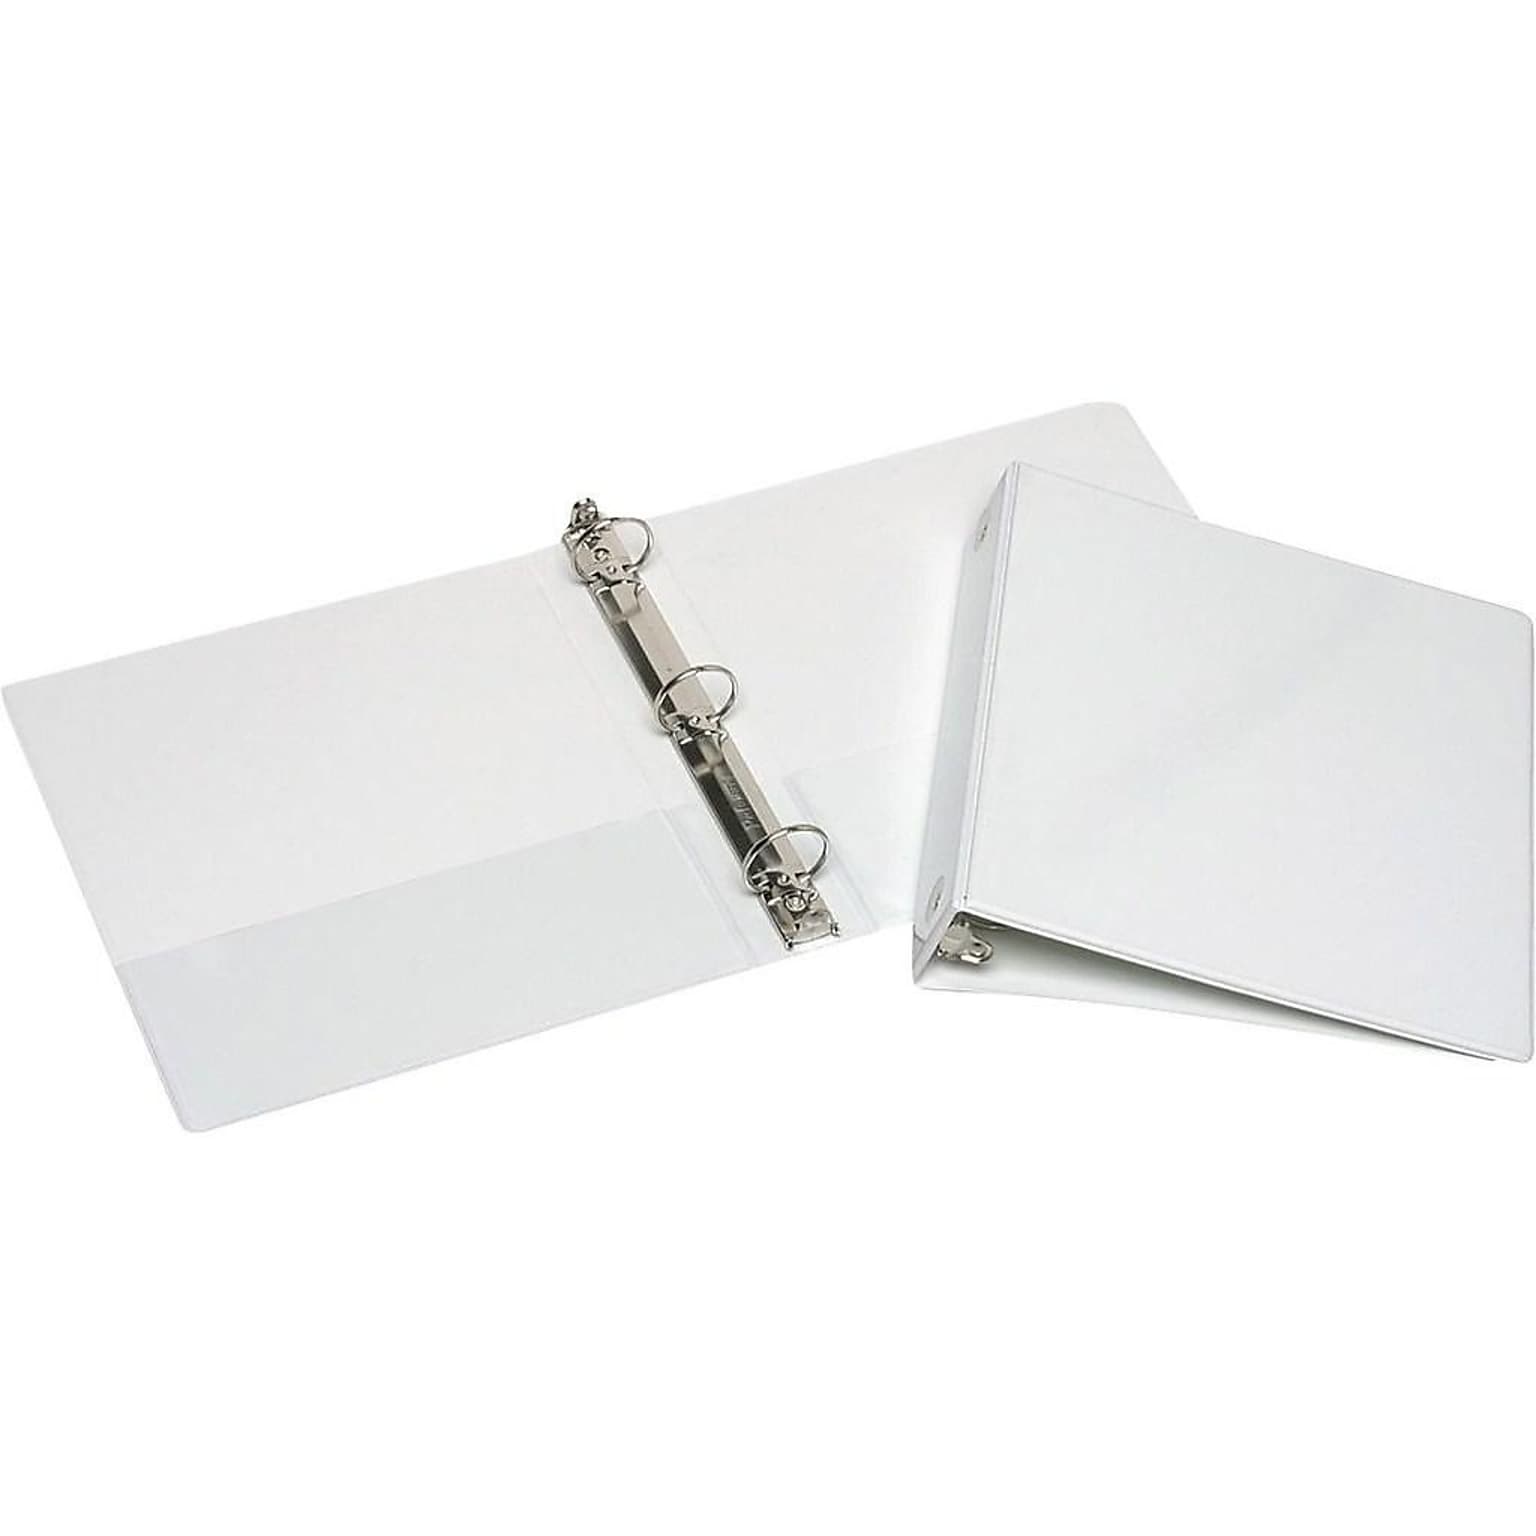 AbilityOne Skilcraft 1 1/2 3-Ring View Binders, White (7510015194381)